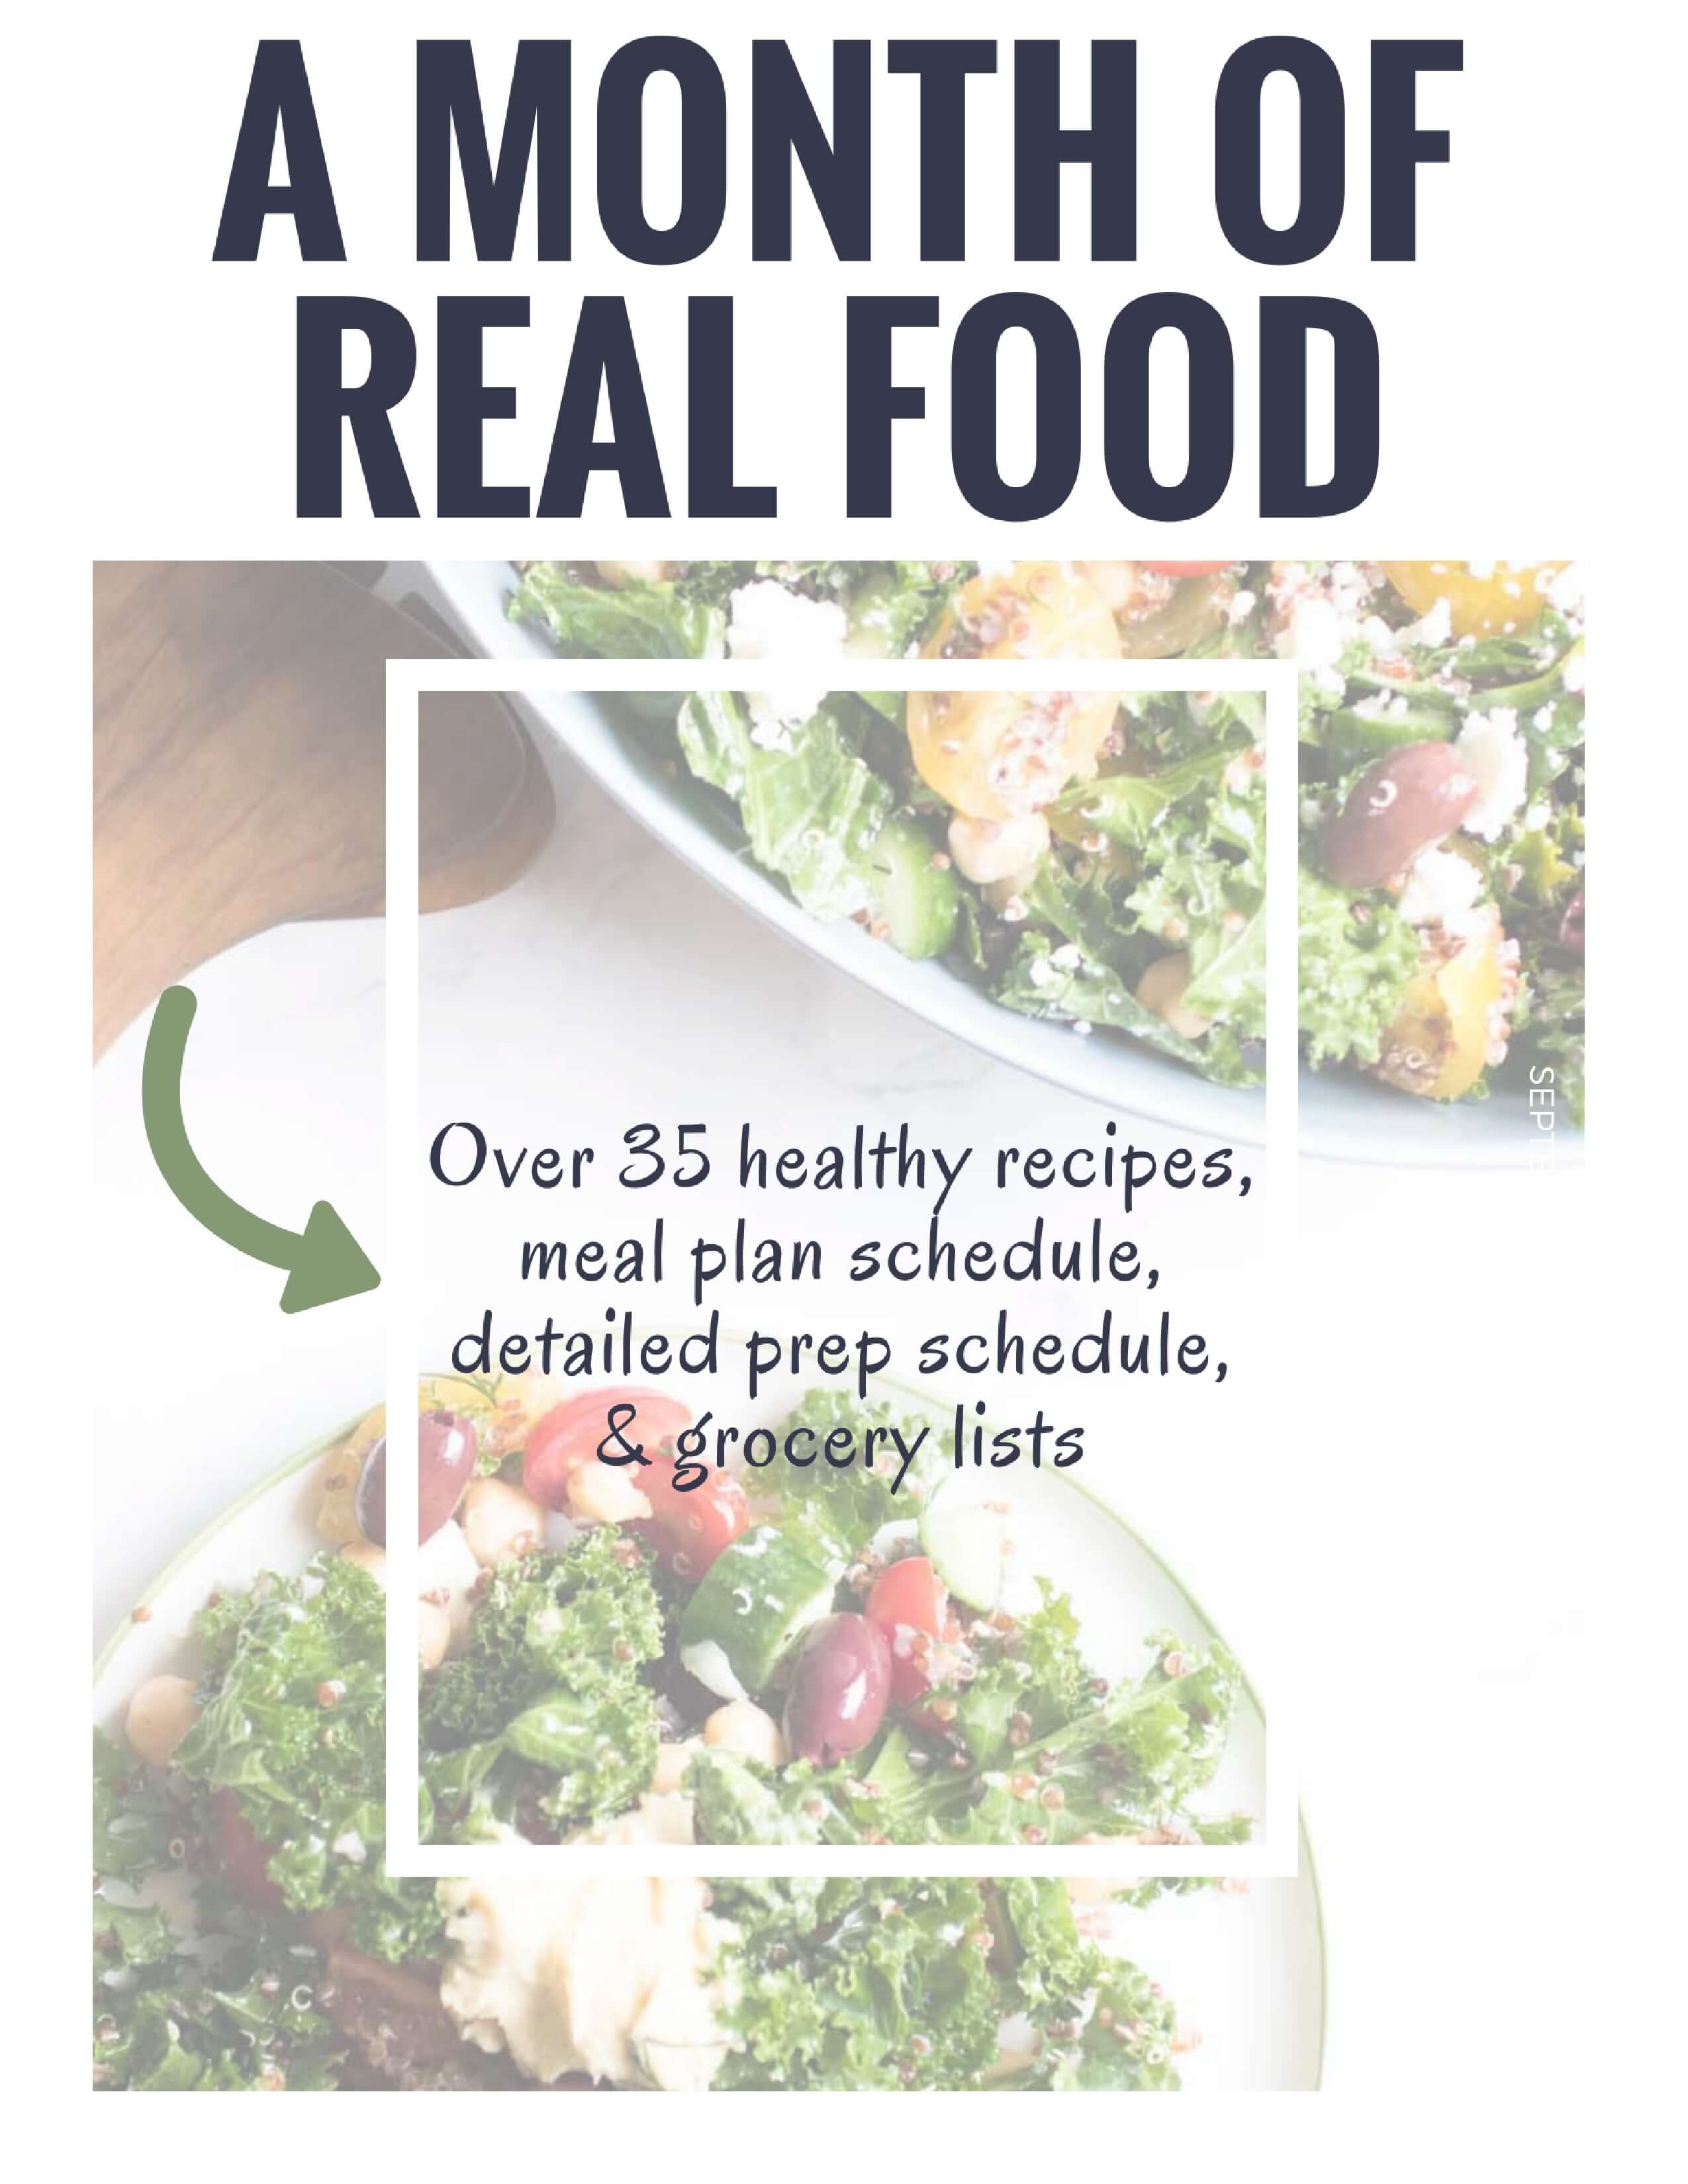 A month of real food meal plan, grocery lists, and prep schedule